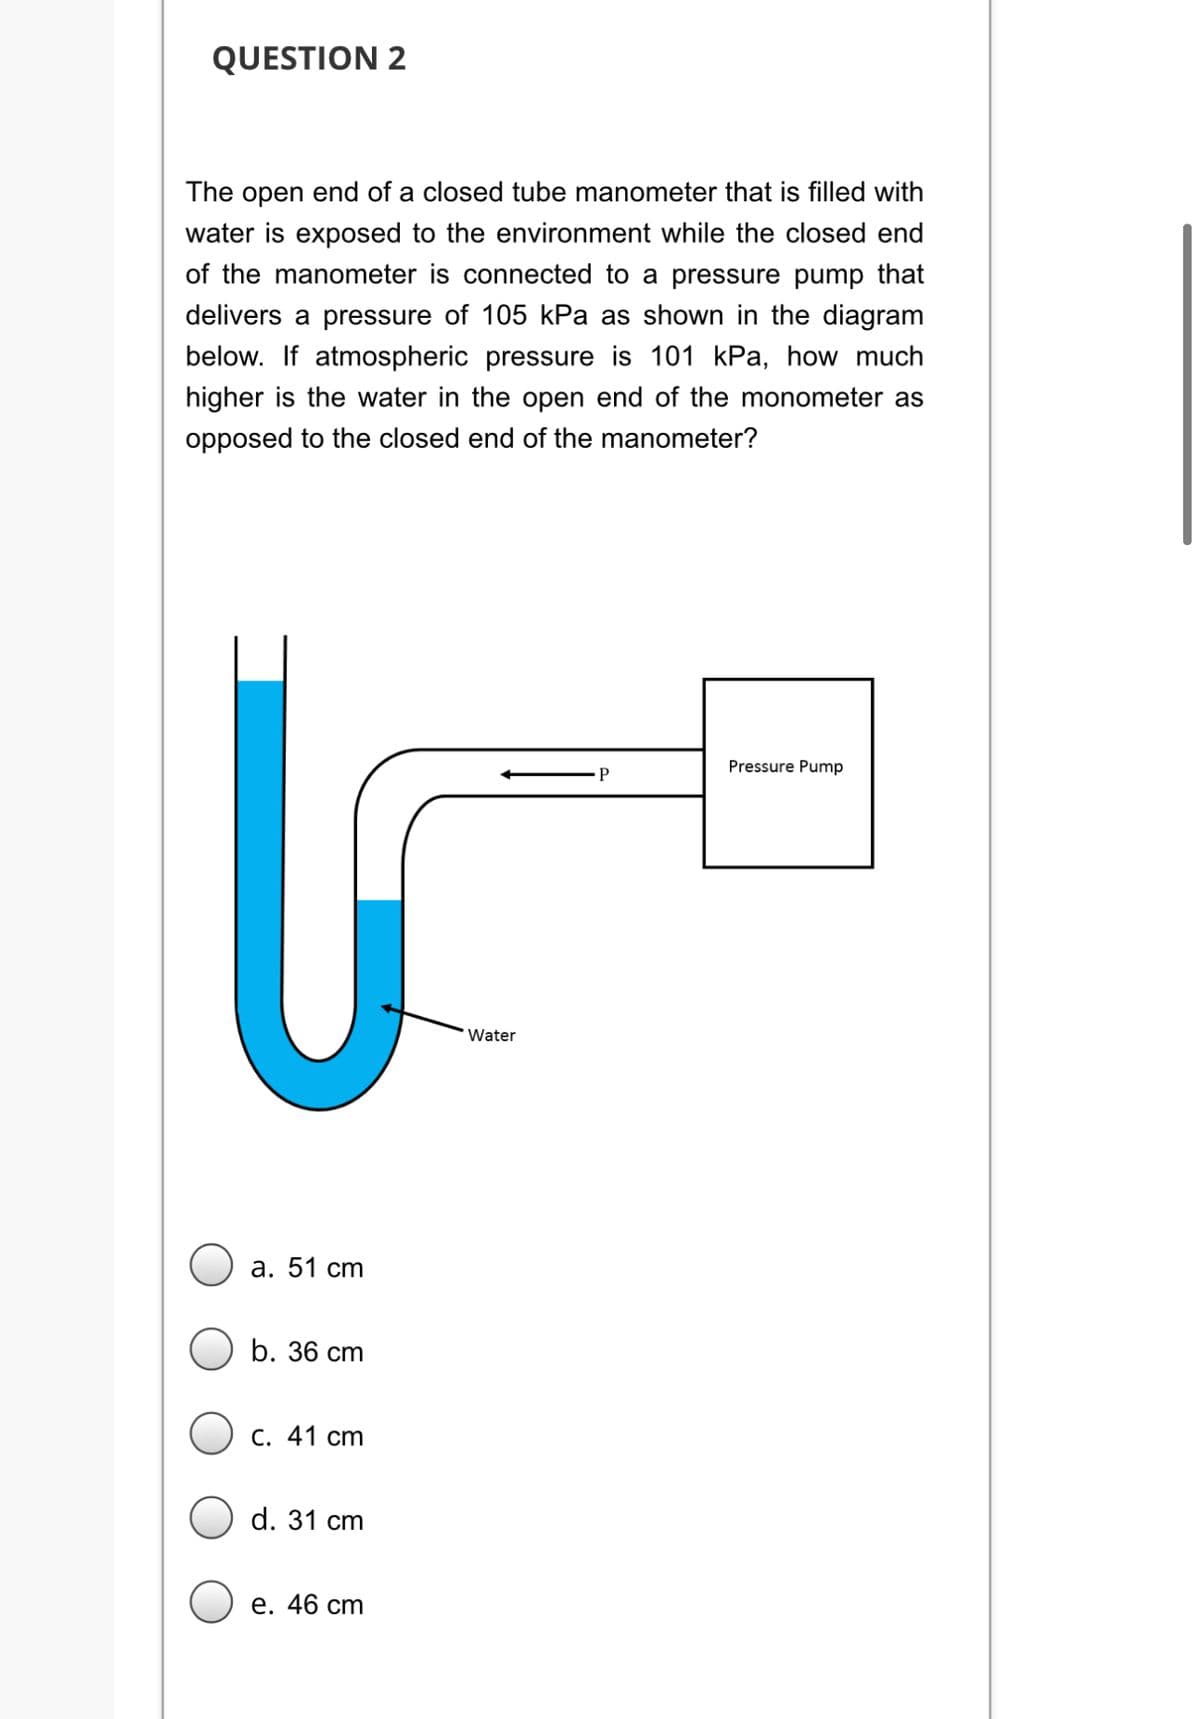 QUESTION 2
The open end of a closed tube manometer that is filled with
water is exposed to the environment while the closed end
of the manometer is connected to a pressure pump that
delivers a pressure of 105 kPa as shown in the diagram
below. If atmospheric pressure is 101 kPa, how much
higher is the water in the open end of the monometer as
opposed to the closed end of the manometer?
Pressure Pump
Water
а. 51 сm
b. 36 cm
С. 41 сm
d. 31 cm
е. 46 ст
